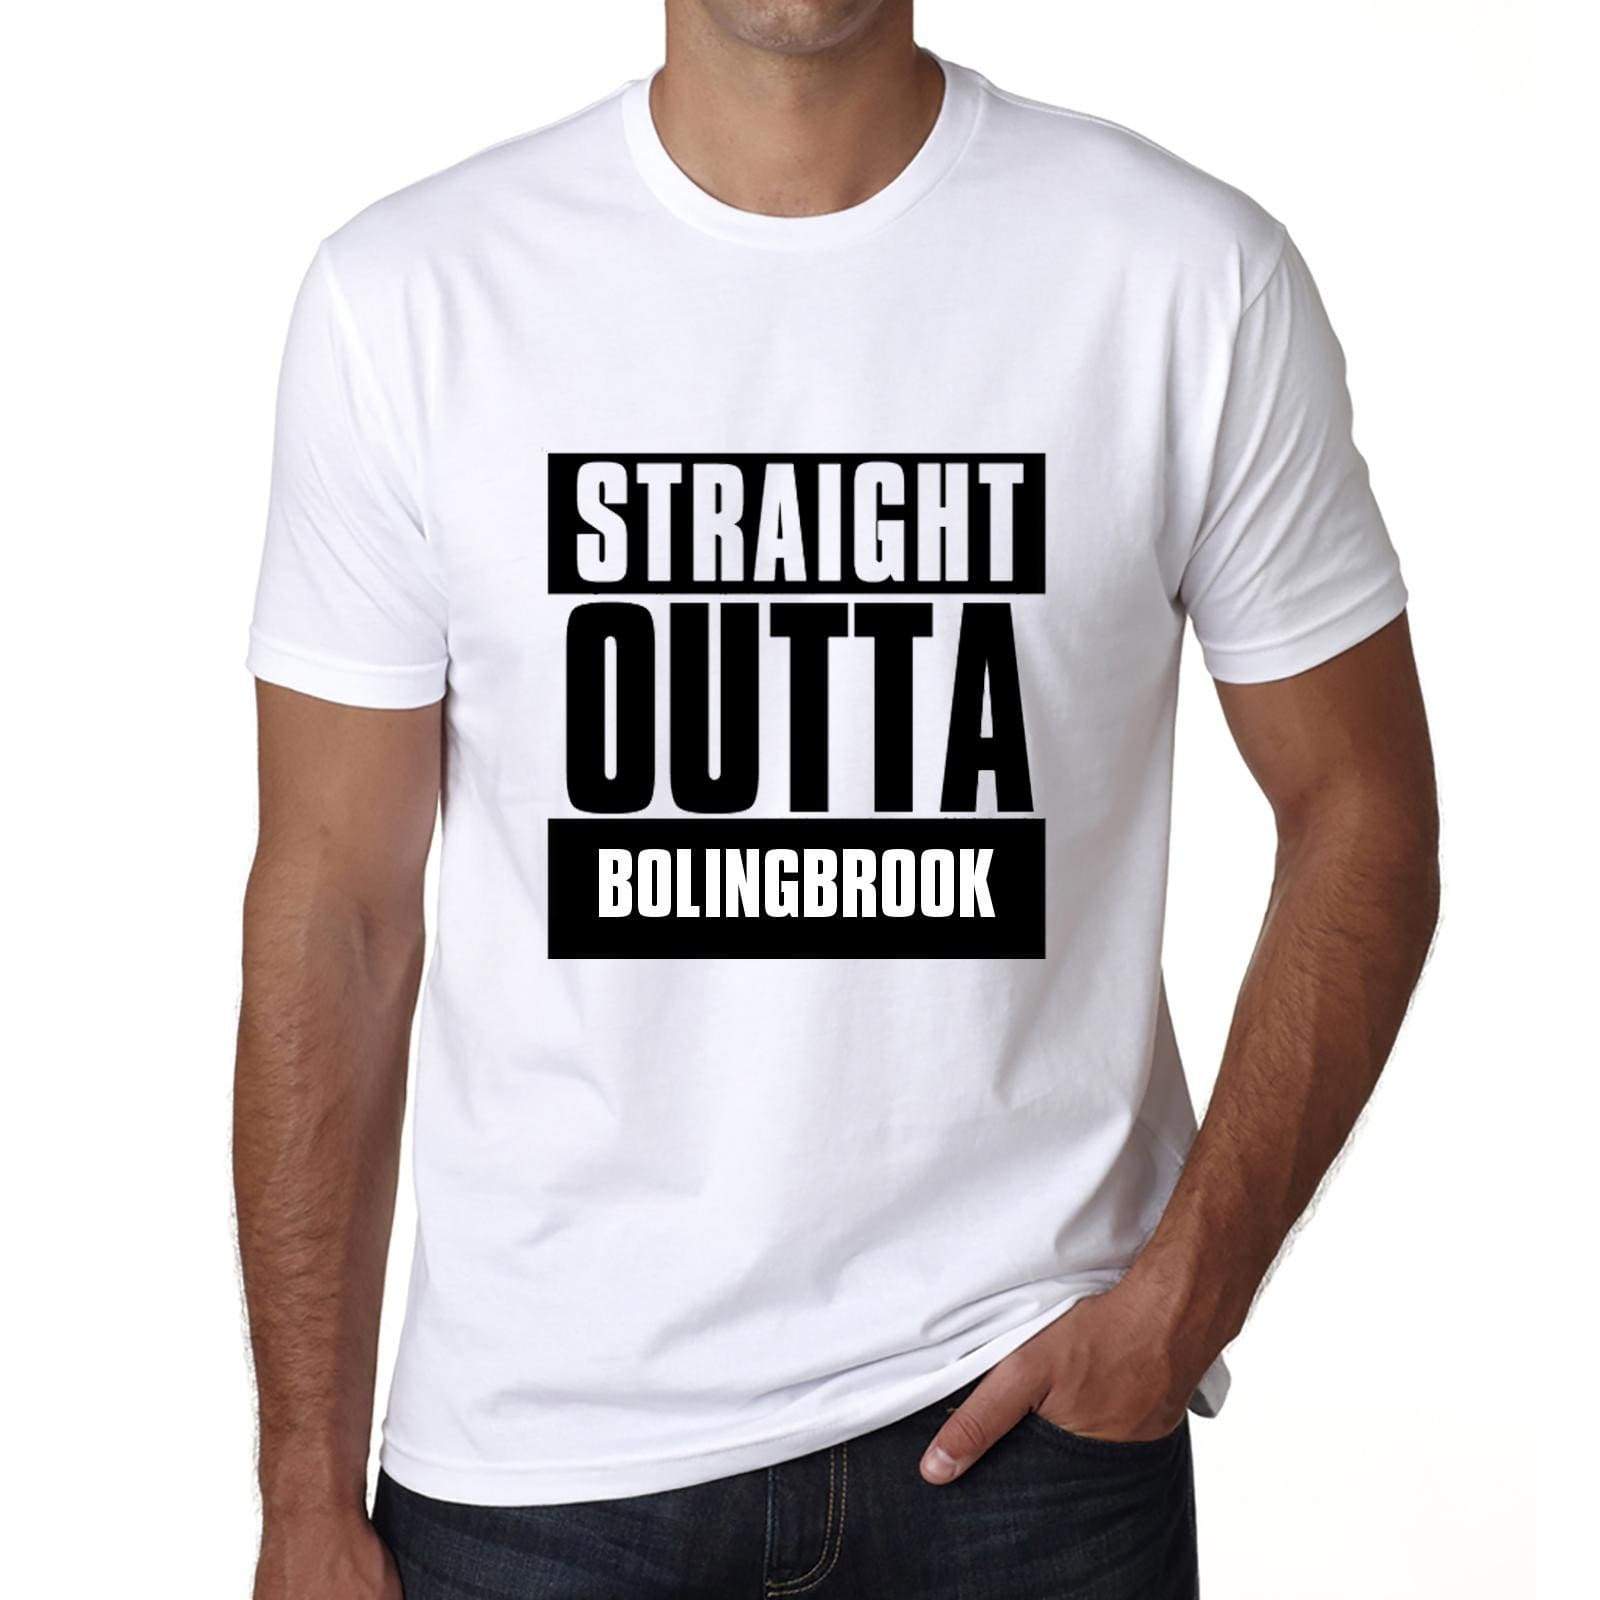 Straight Outta Bolingbrook Mens Short Sleeve Round Neck T-Shirt 00027 - White / S - Casual